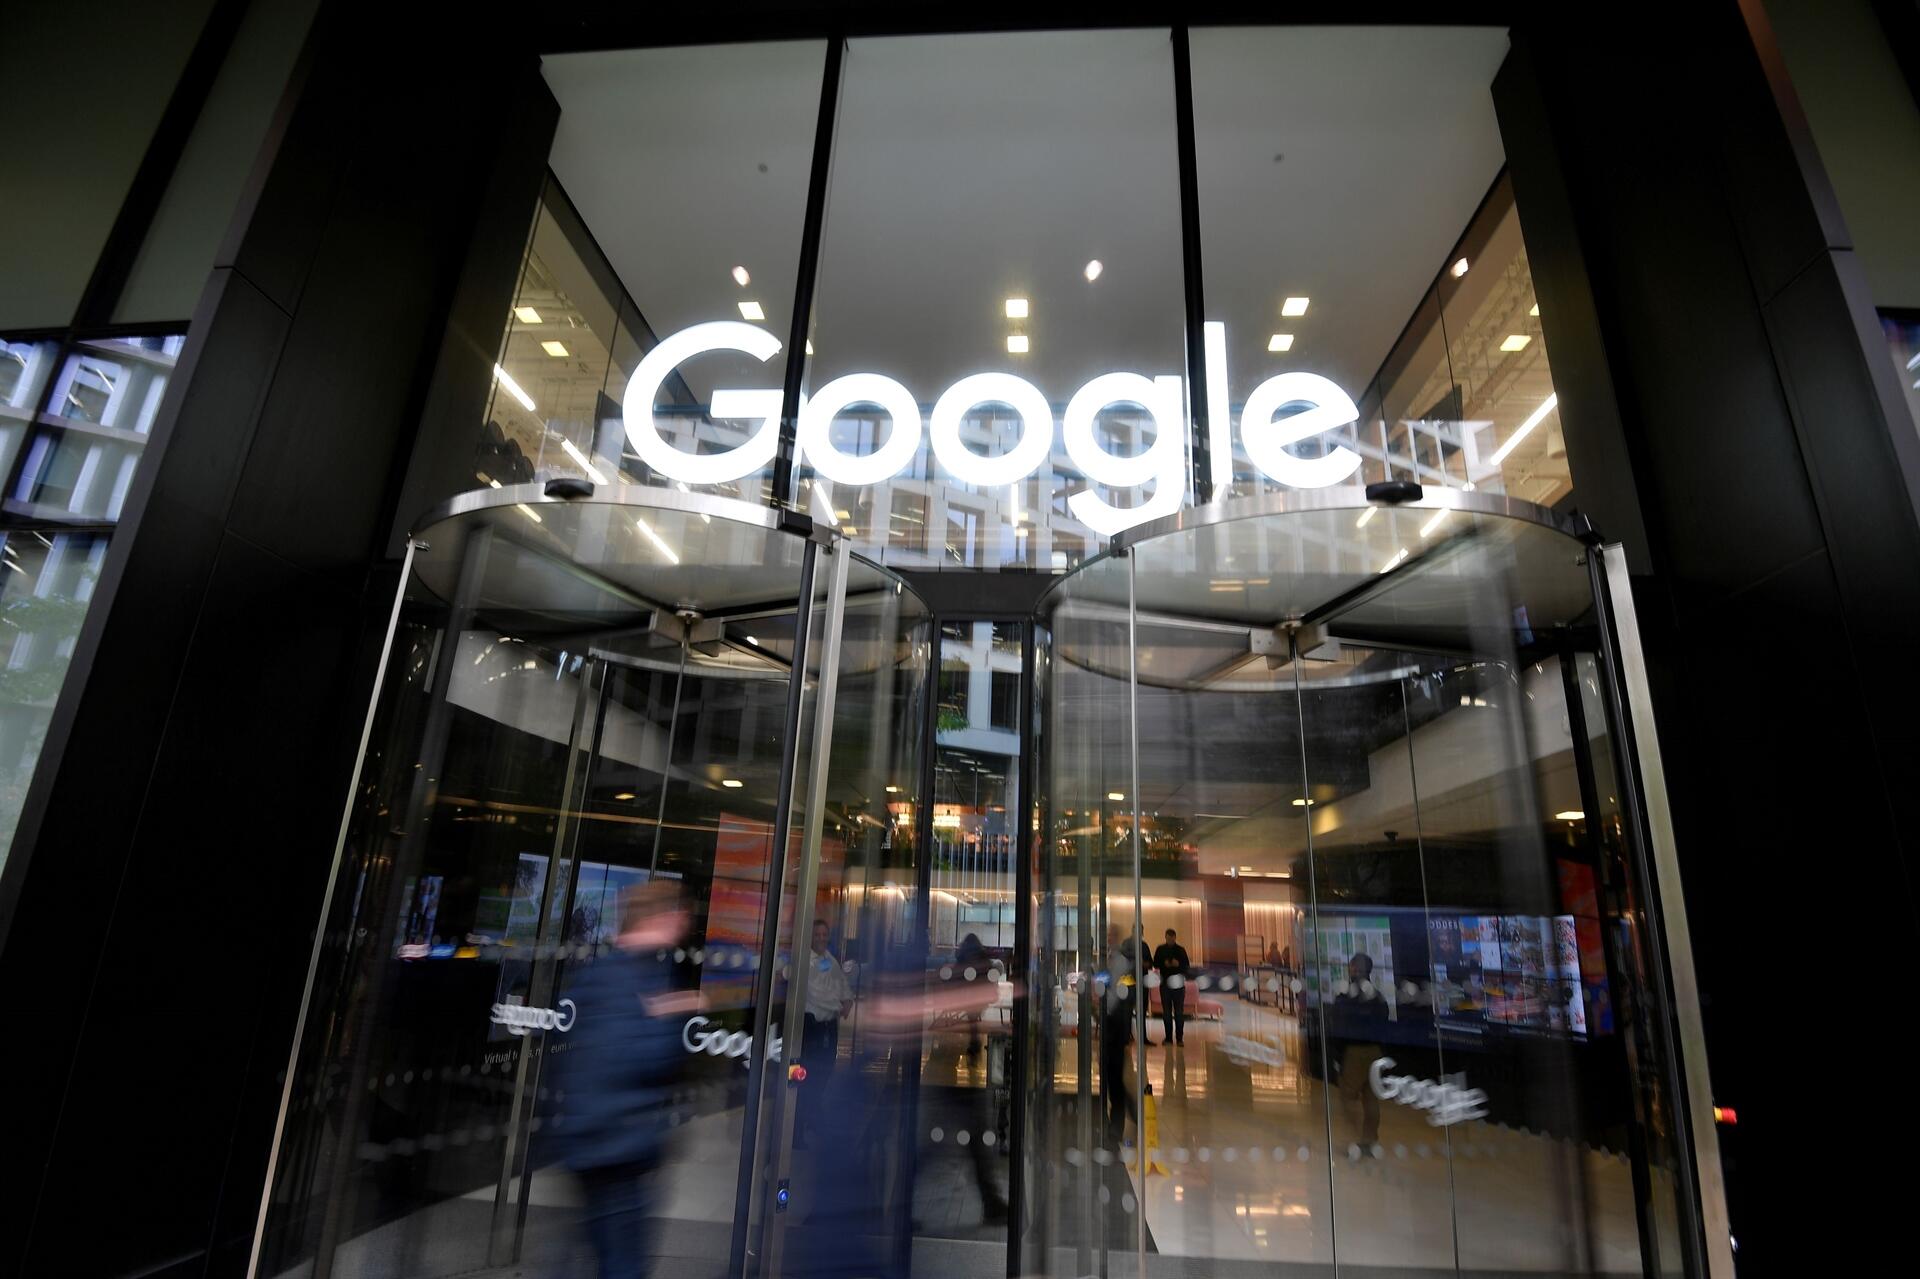 Google has already signed licensing agreements with Italian publishers